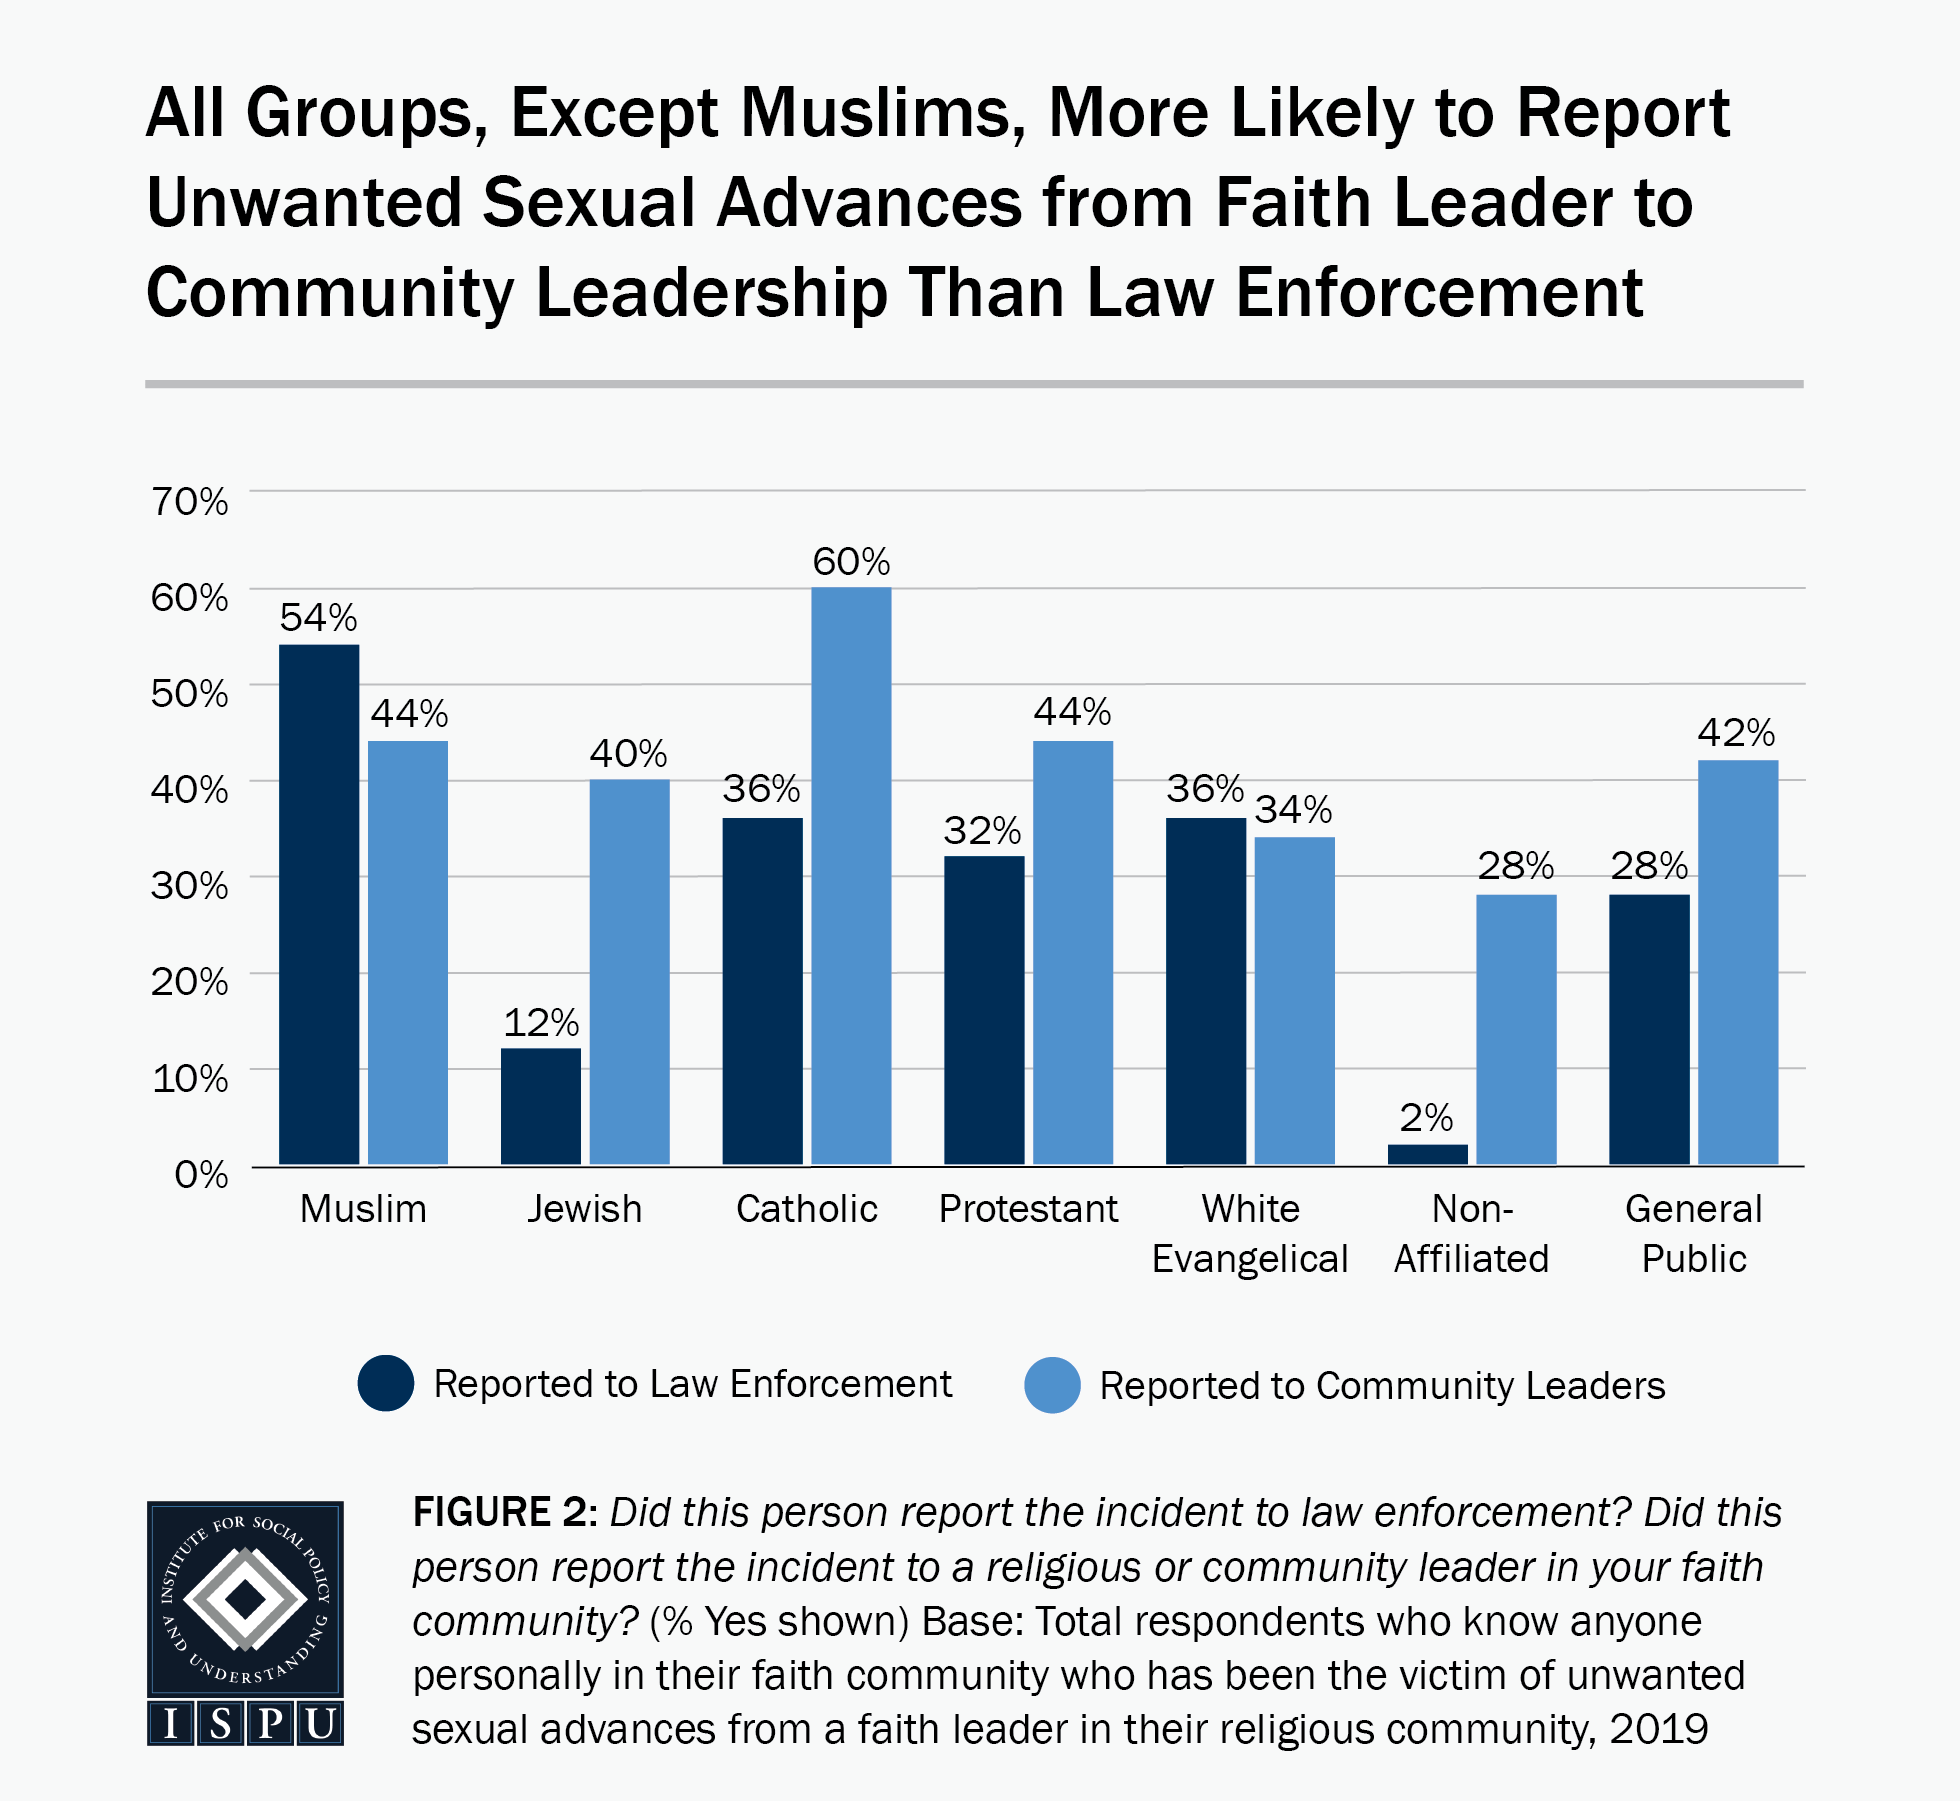 Figure 2: A bar graph showing that all groups, except Muslims, are more likely to report unwanted sexual advances from faith leaders to their community leadership than to law enforcement